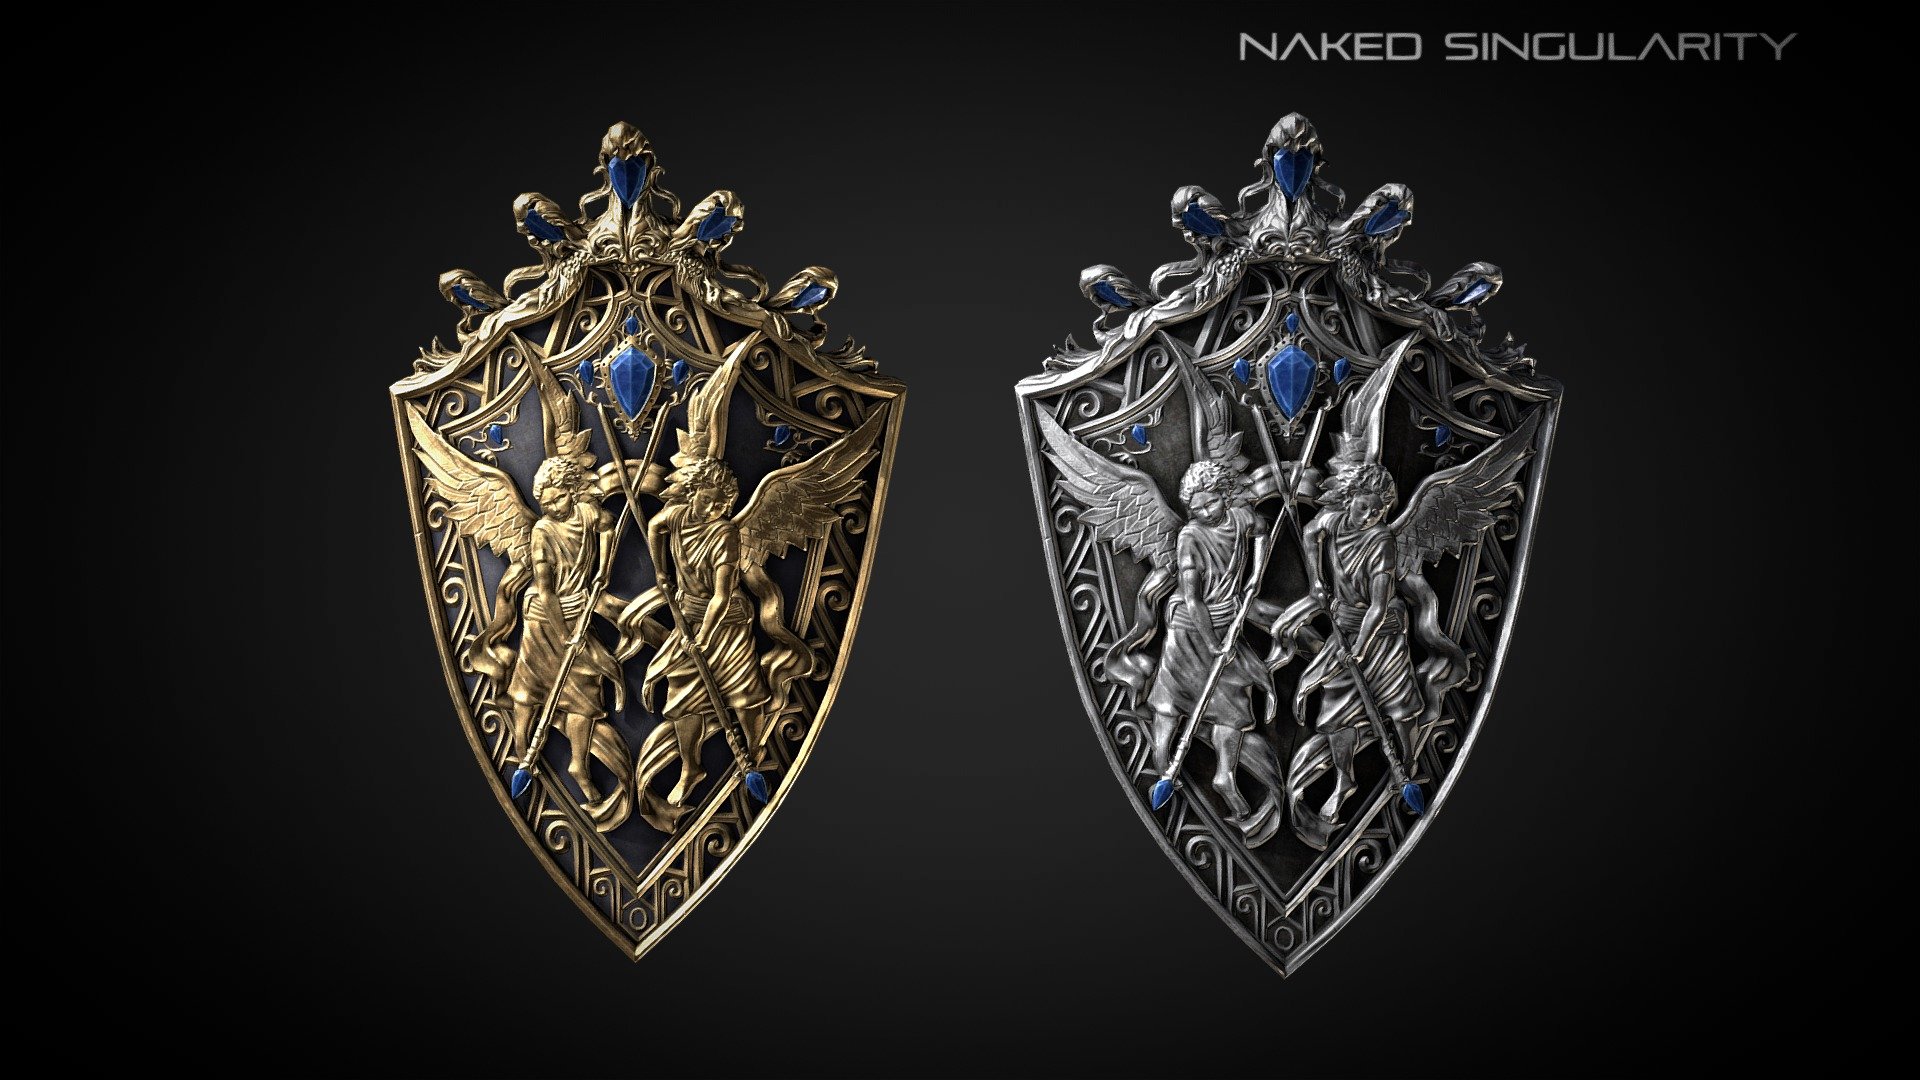 Twin angel shield | Medieval dark fantasy weapon | 4K | Lowpoly | PBR

Original concept by Naked Singularity. Inspire by Dark Souls triology and Elden Ring




High quality low poly model.

4K High resolution texture.

Real world scale.

PBR texturing.

Check out other Dark fantasy game asset

Customer support: nakedsingularity.studio@gmail.com

Follow us on: Youtube | Facebook | Instagram | Twitter | Artstation - Twin angel shield | Medieval dark fantasy weapon - Buy Royalty Free 3D model by Naked Singularity Studio (@nakedsingularity) 3d model